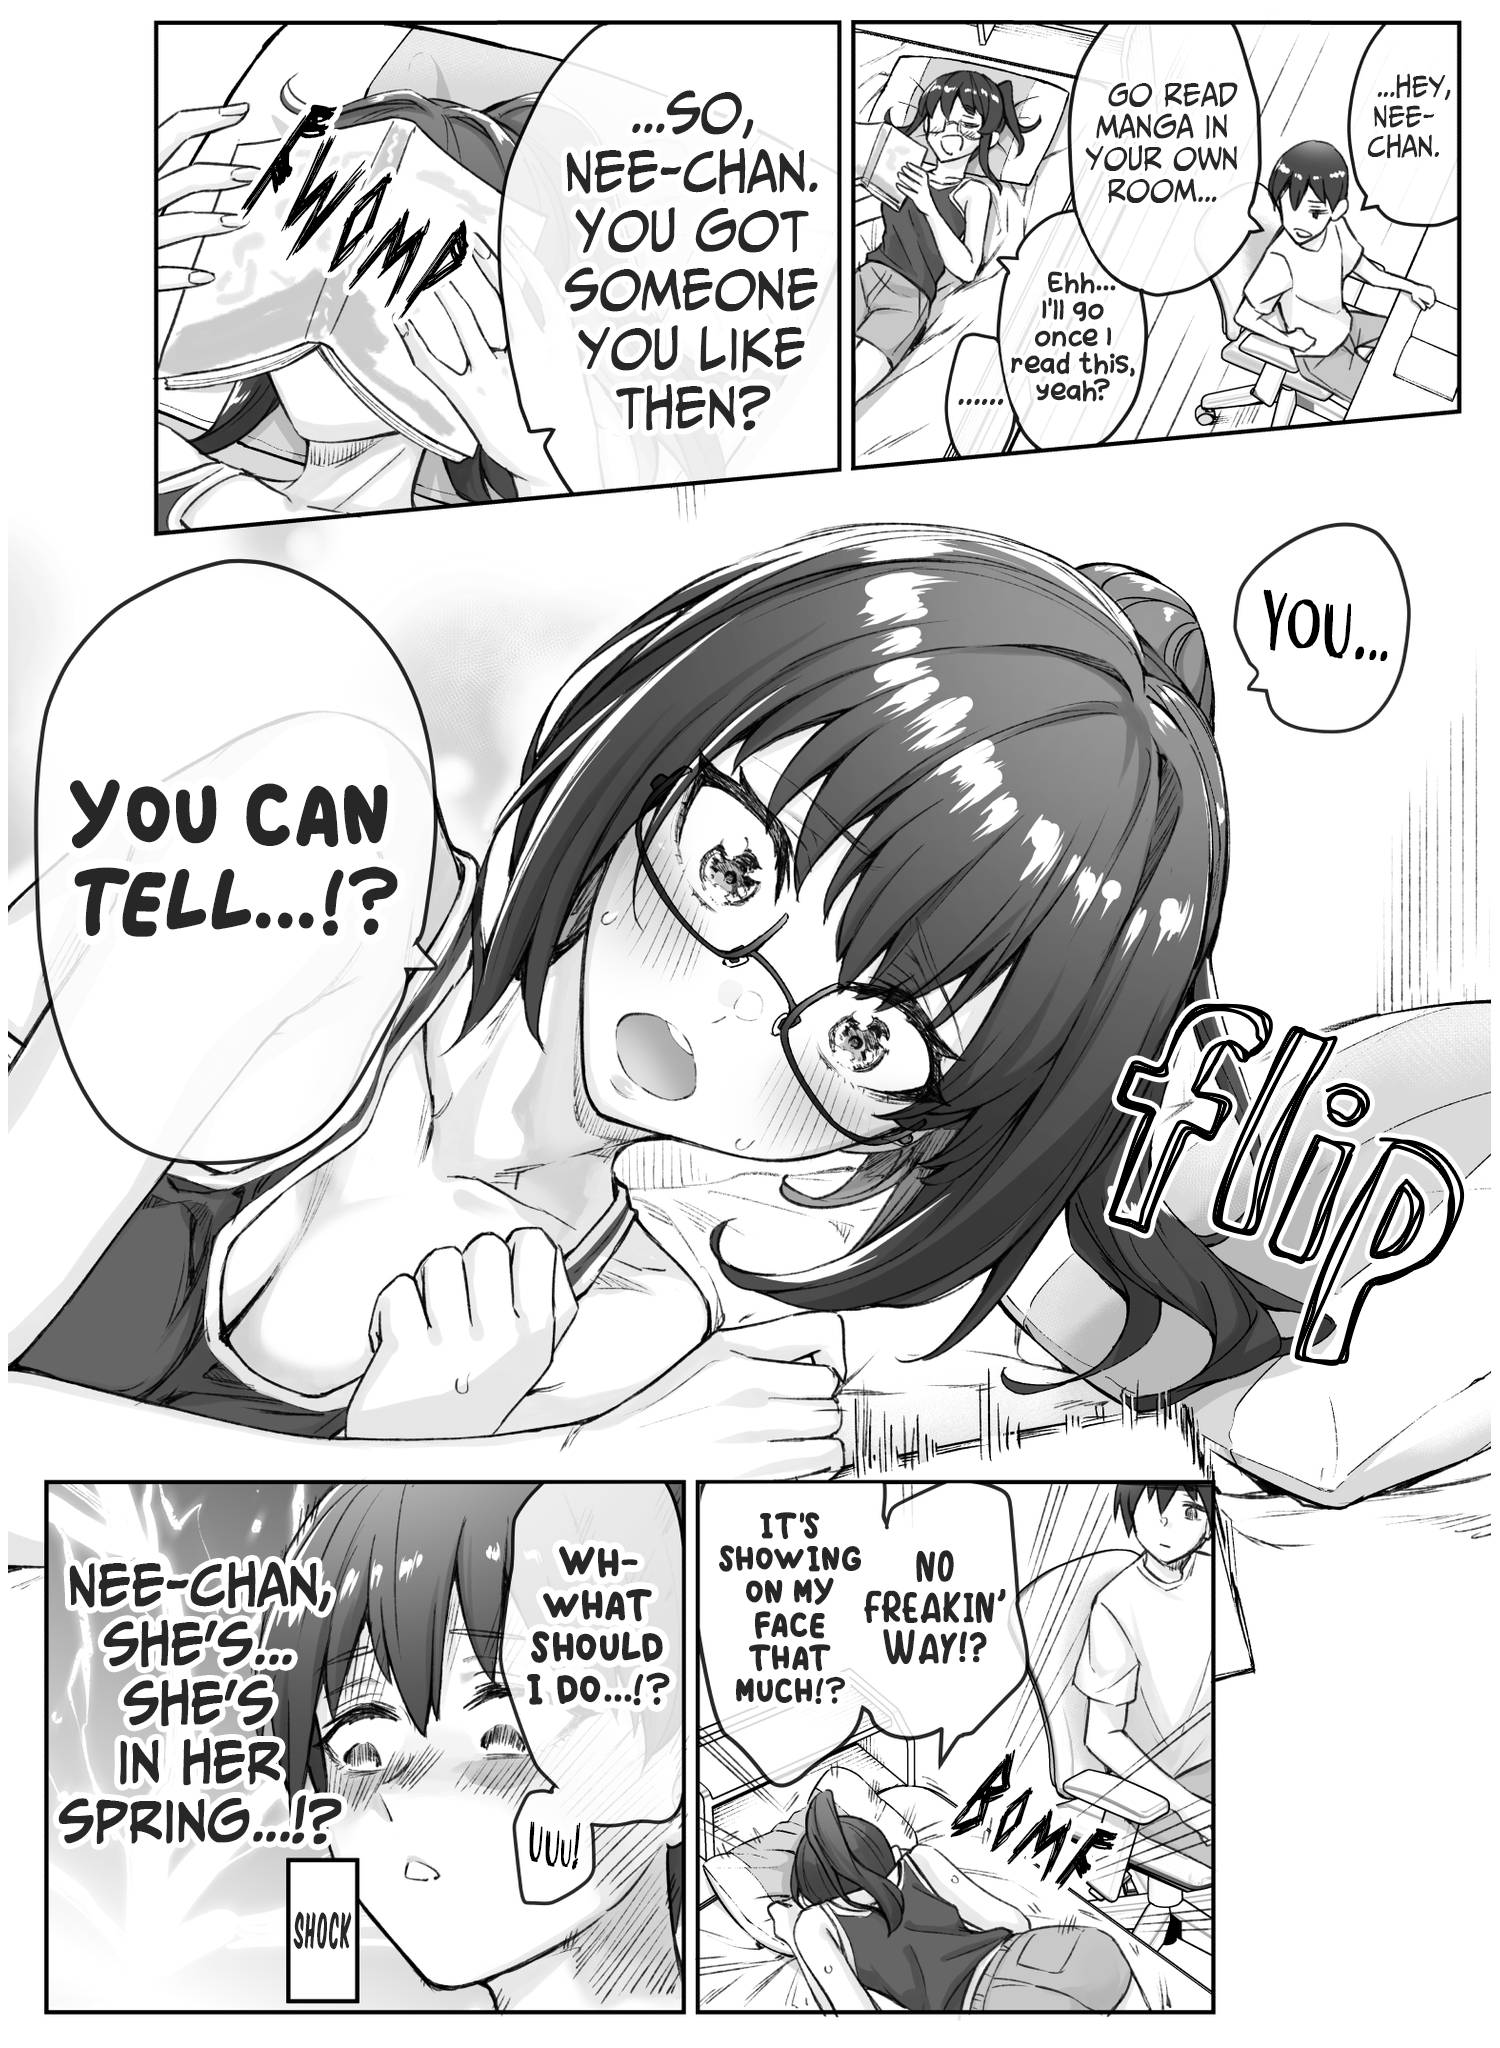 The Tsuntsuntsuntsuntsuntsuntsuntsuntsuntsuntsundere Girl Getting Less and Less Tsun Day by Day - chapter 21 - #1